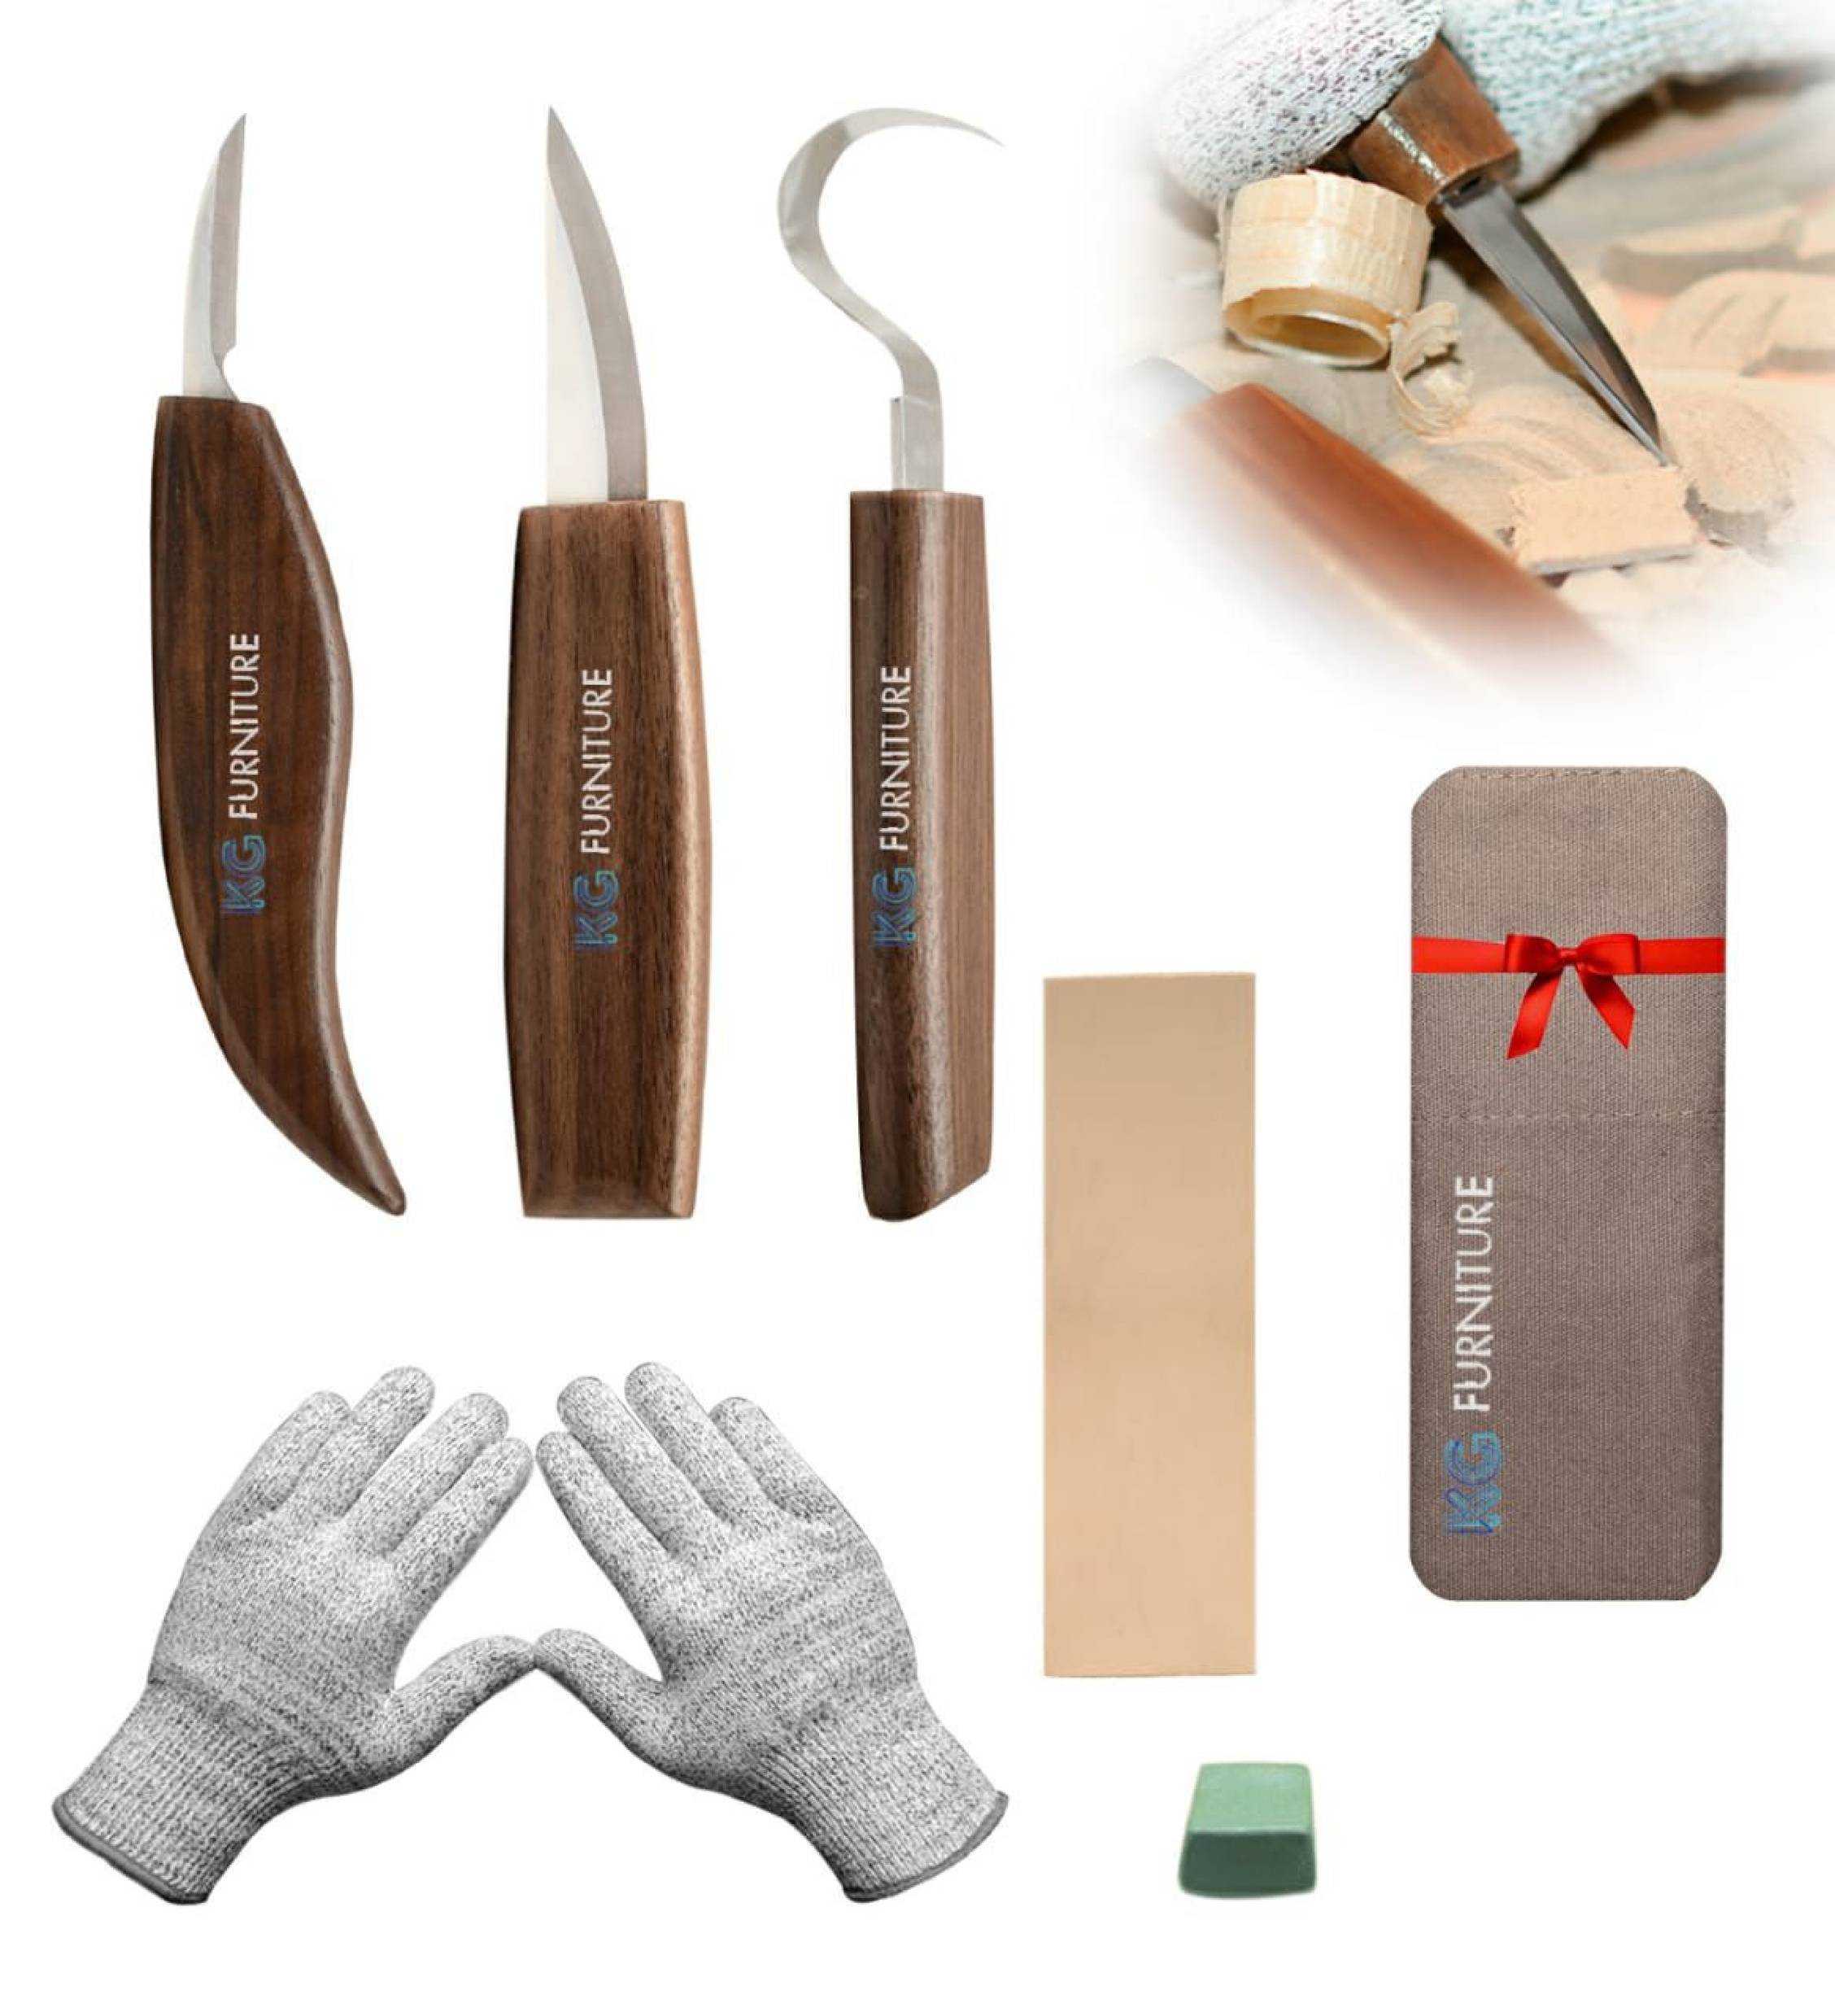 Wood Carving Tools 6 in 1 Knife Set Trending Product